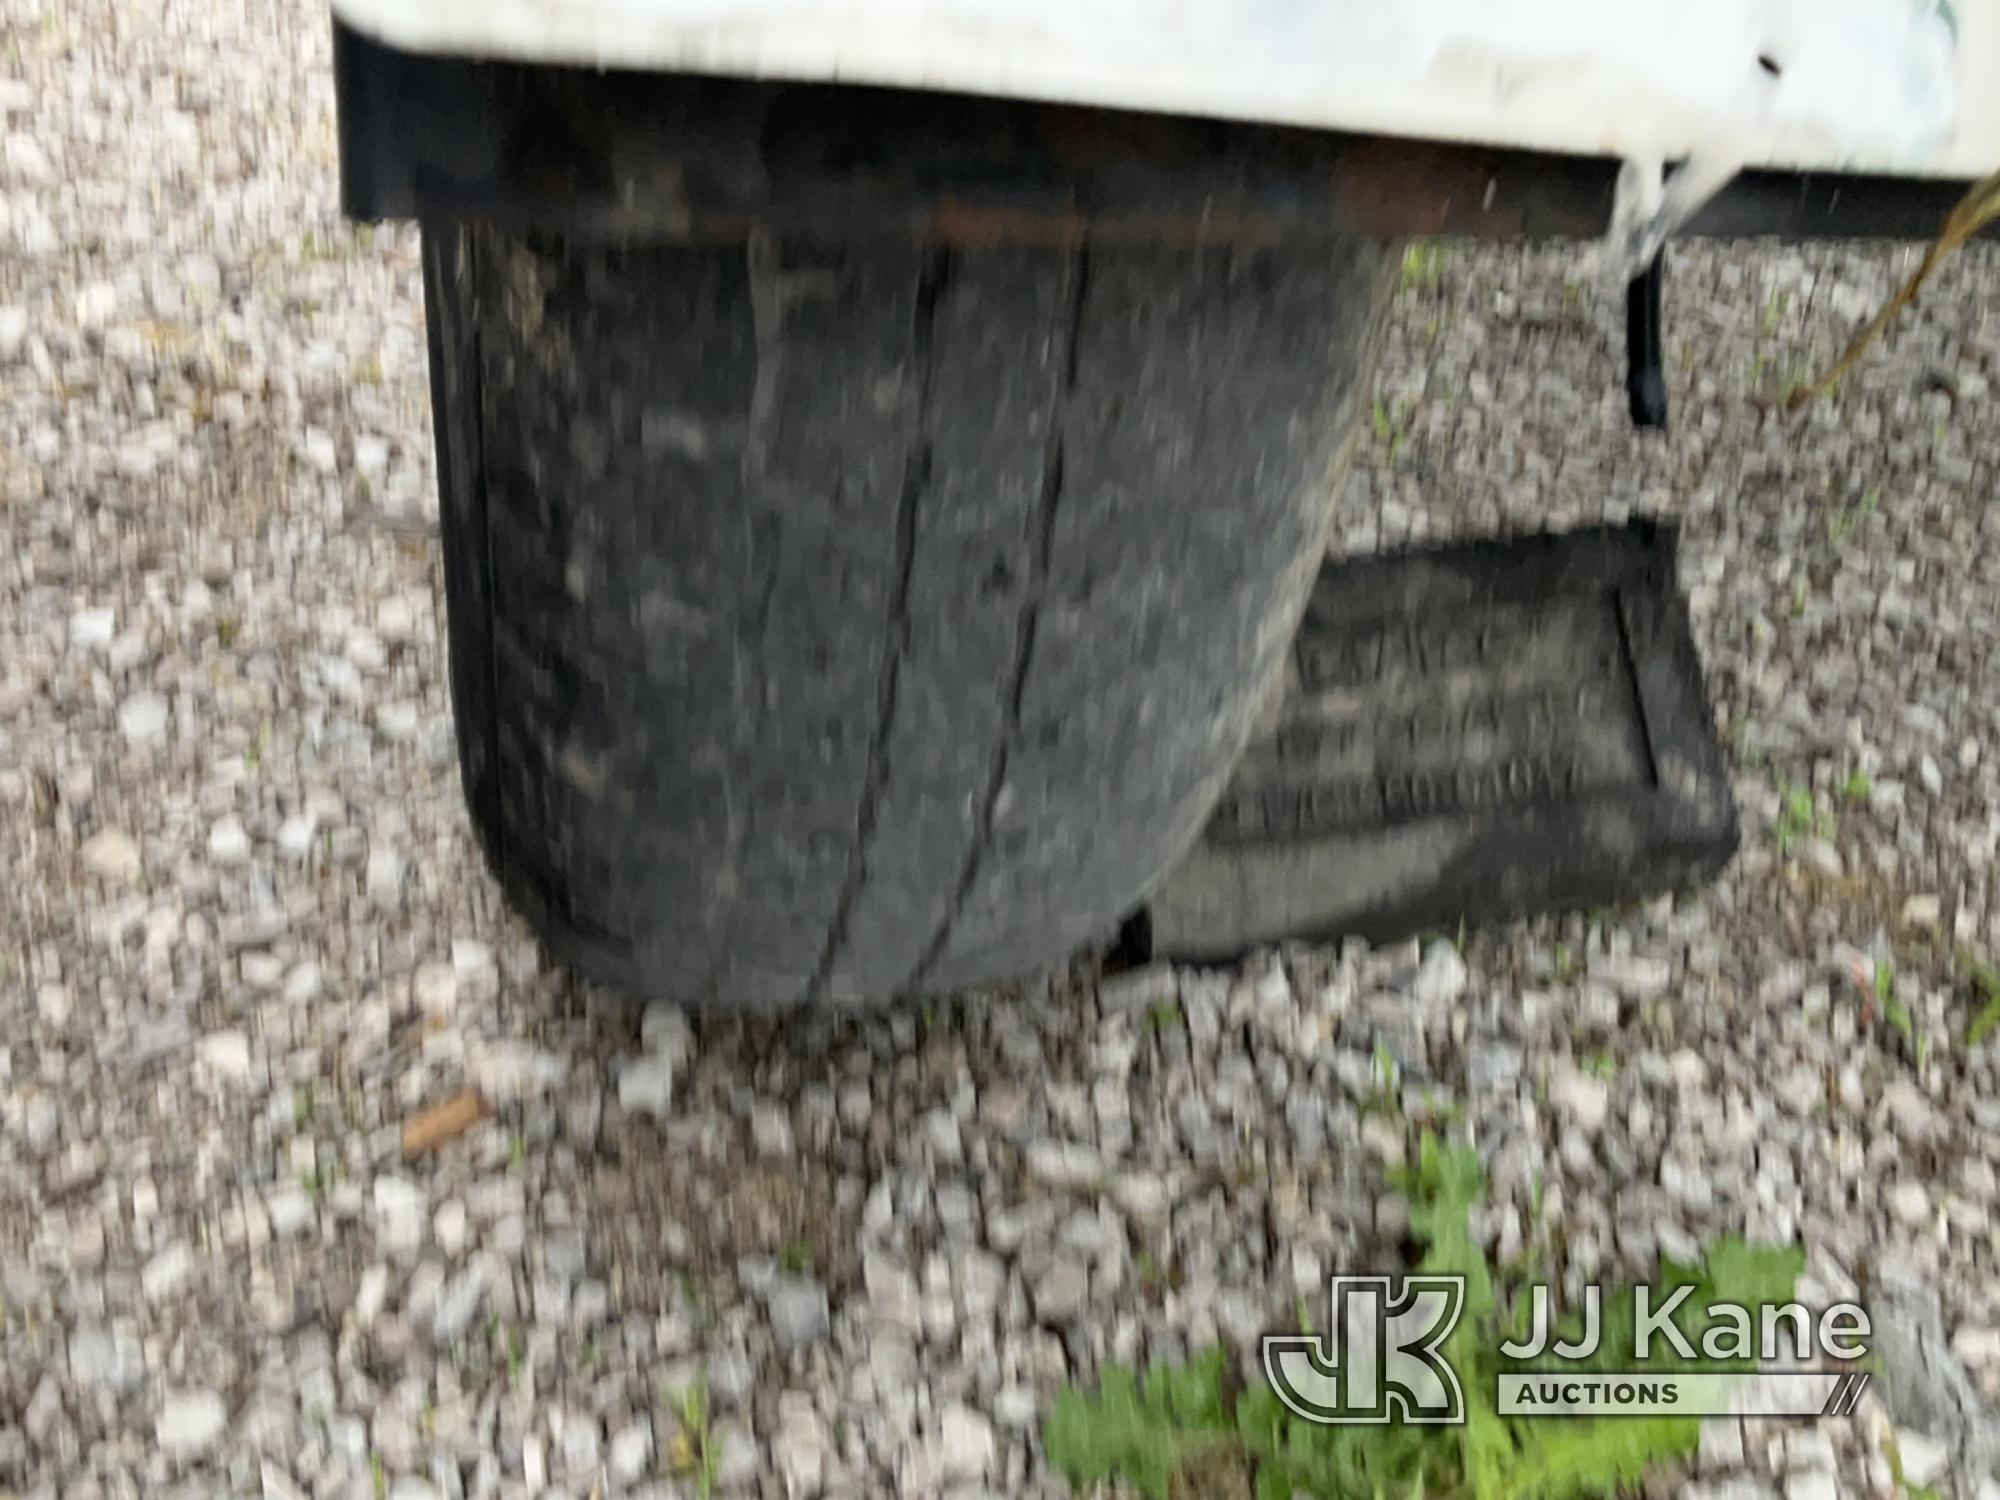 (Verona, KY) 2016 Altec DC1317 Chipper (13in Disc) NO TITLE) (Runs) (Does Not Operate, Stalls When E